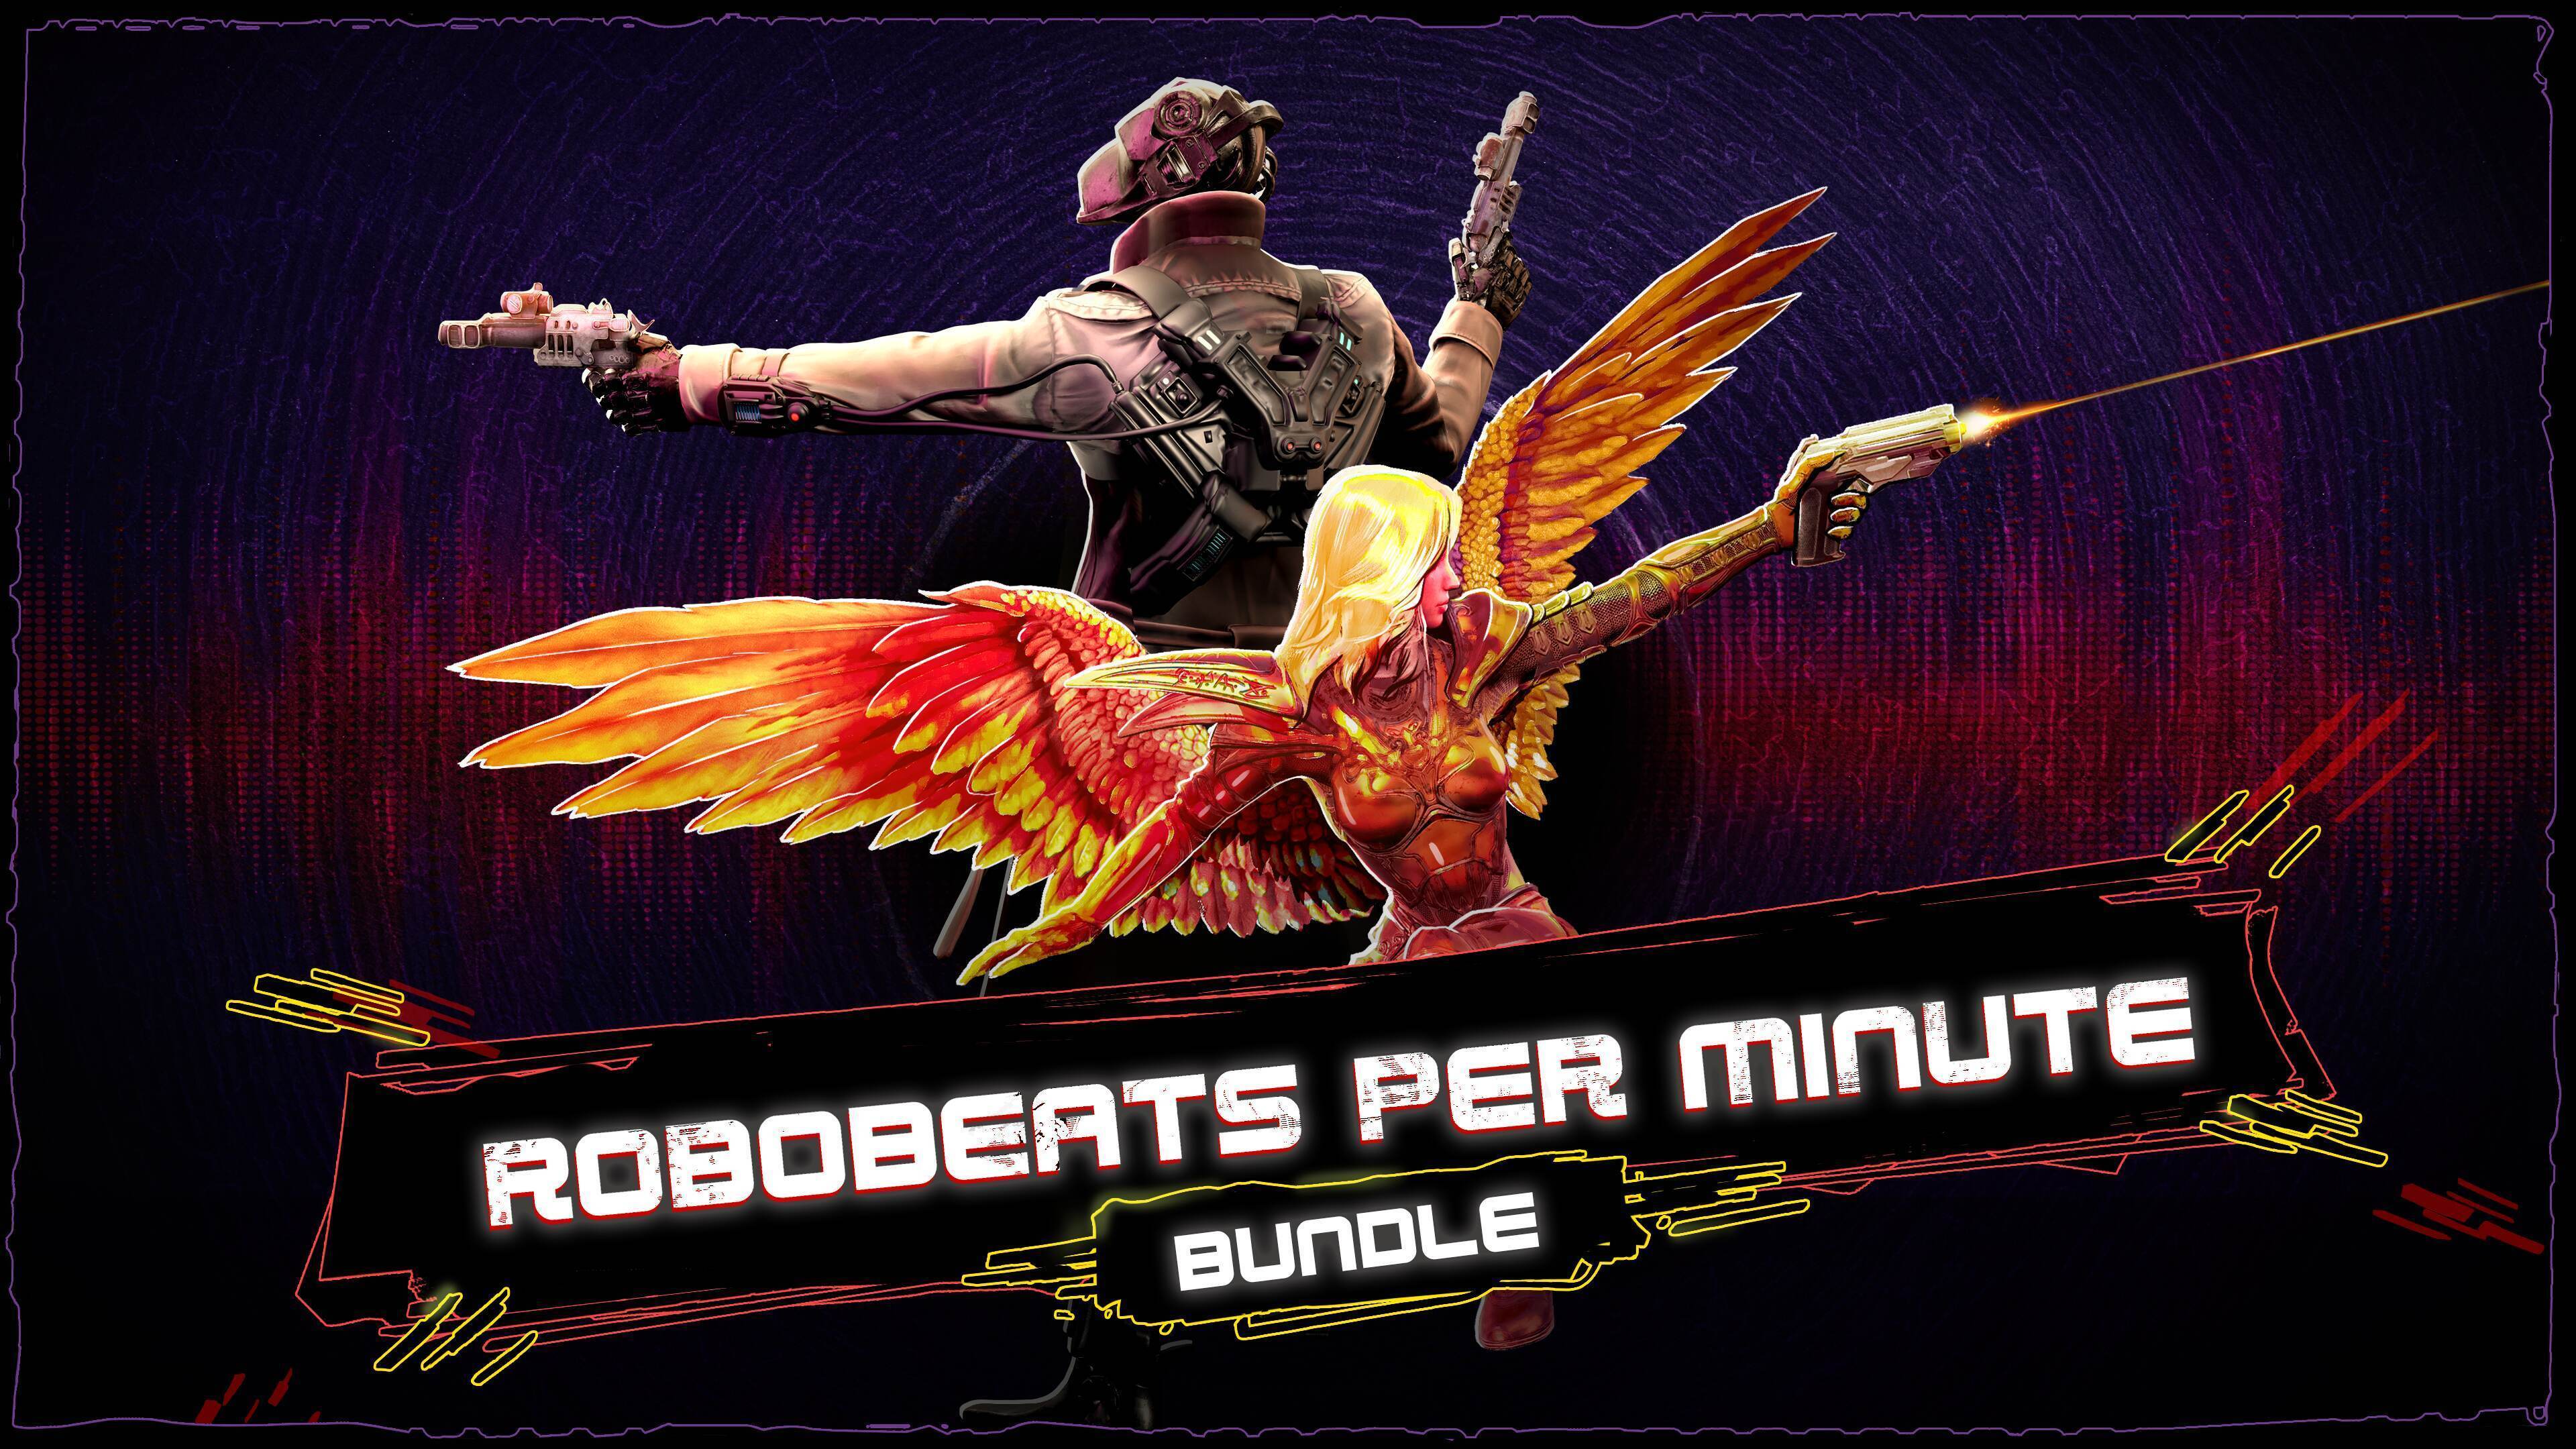 Rhythm shooters, ROBOBEAT and BPM: BULLETS PER MINUTE join forces for a Steam bundle and special in-game content.